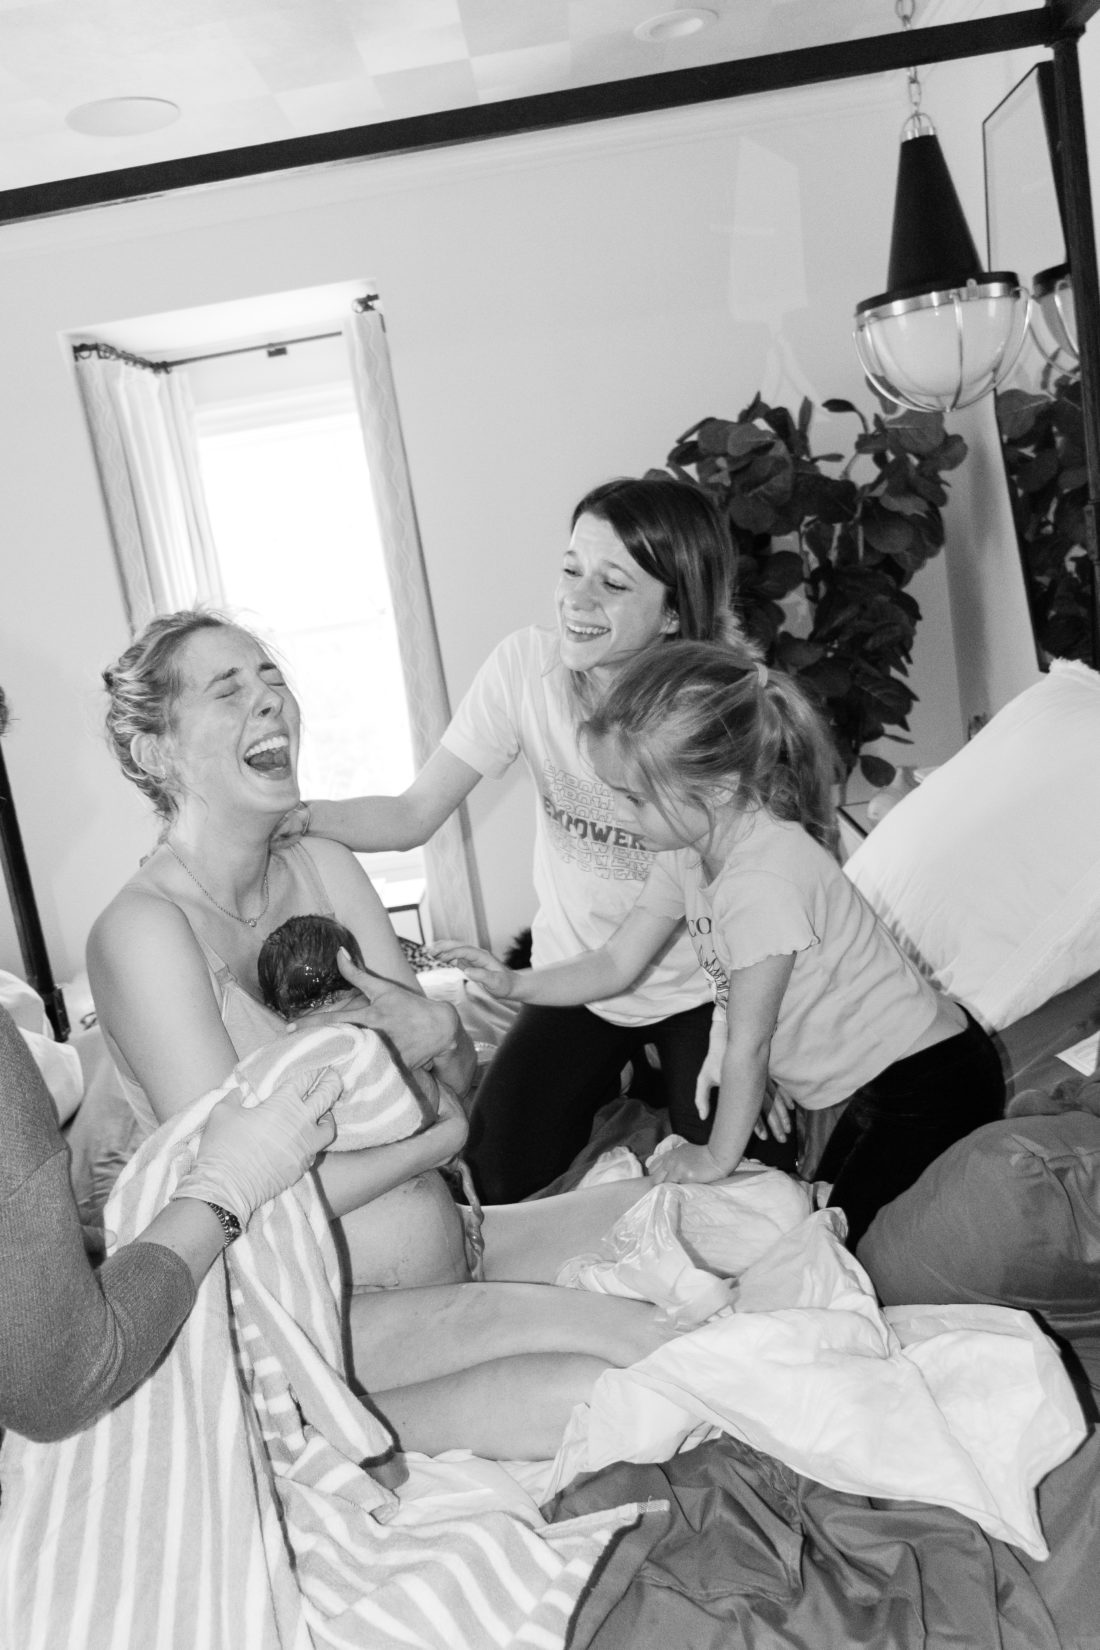 Eva Amurri shares her third son Mateo Antoni's birth story, as well as personal photos from his birth